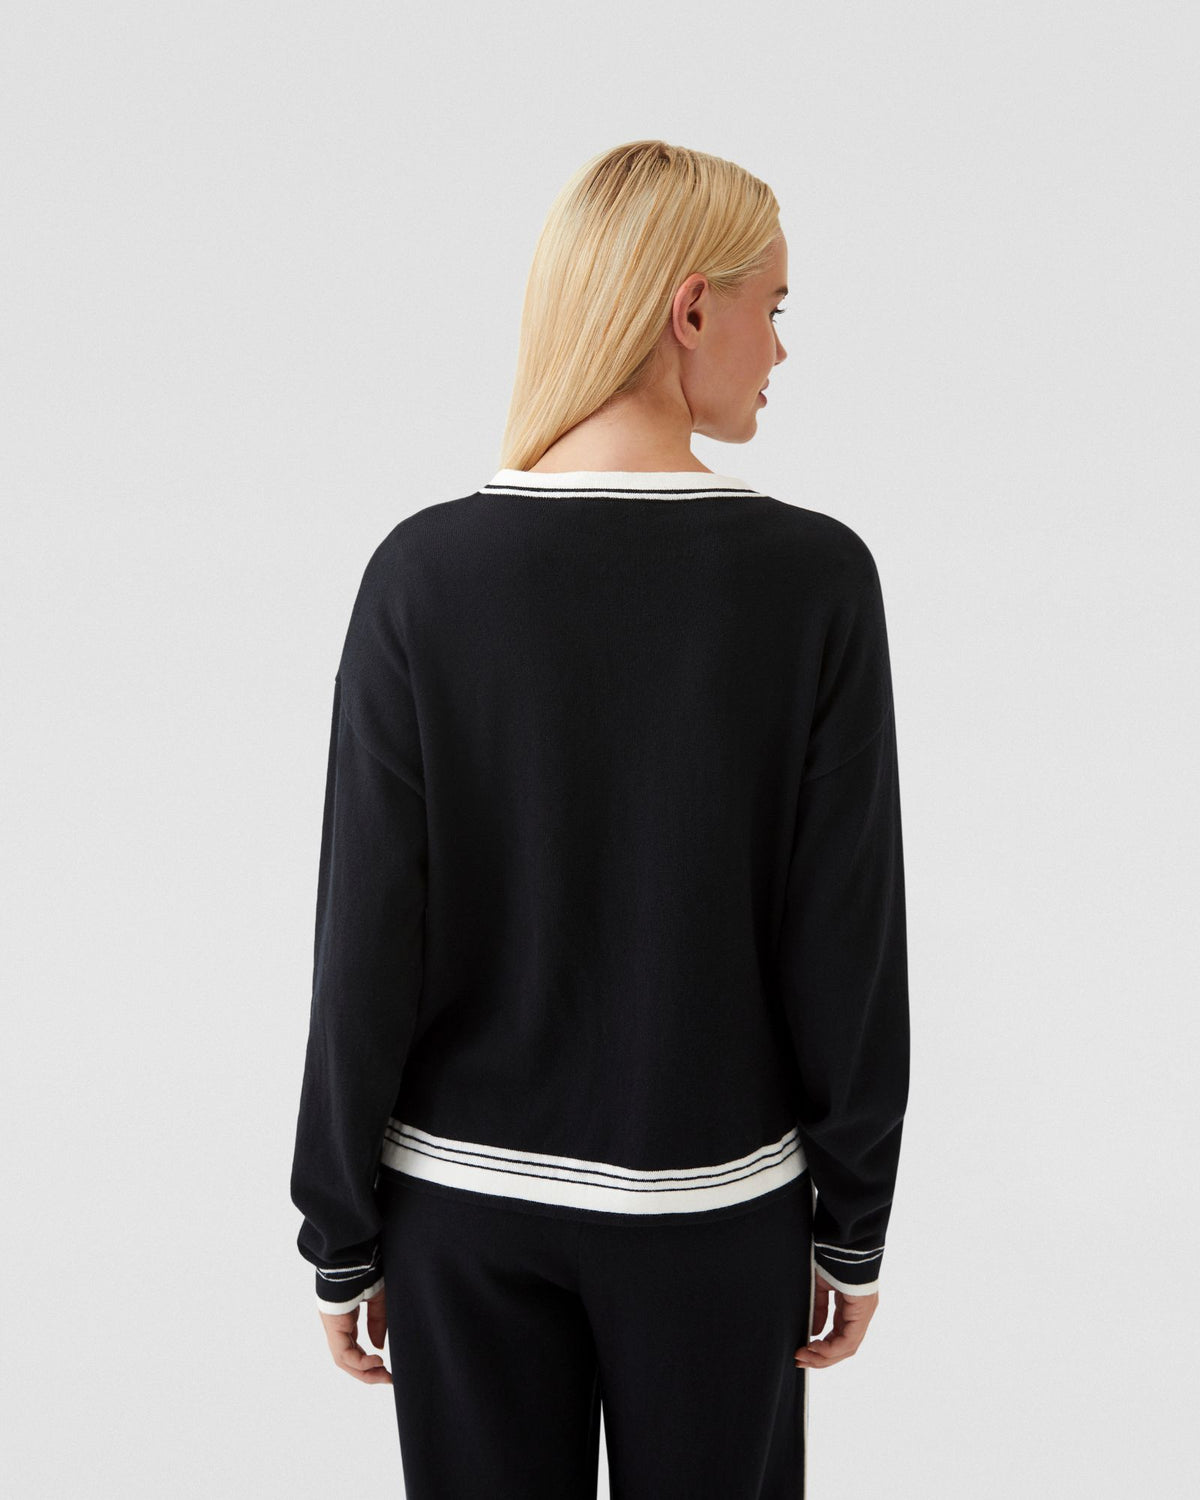 ANNALISE CREW NECK KNIT - AVAILABLE ~ 1-2 weeks WOMENS KNITWEAR